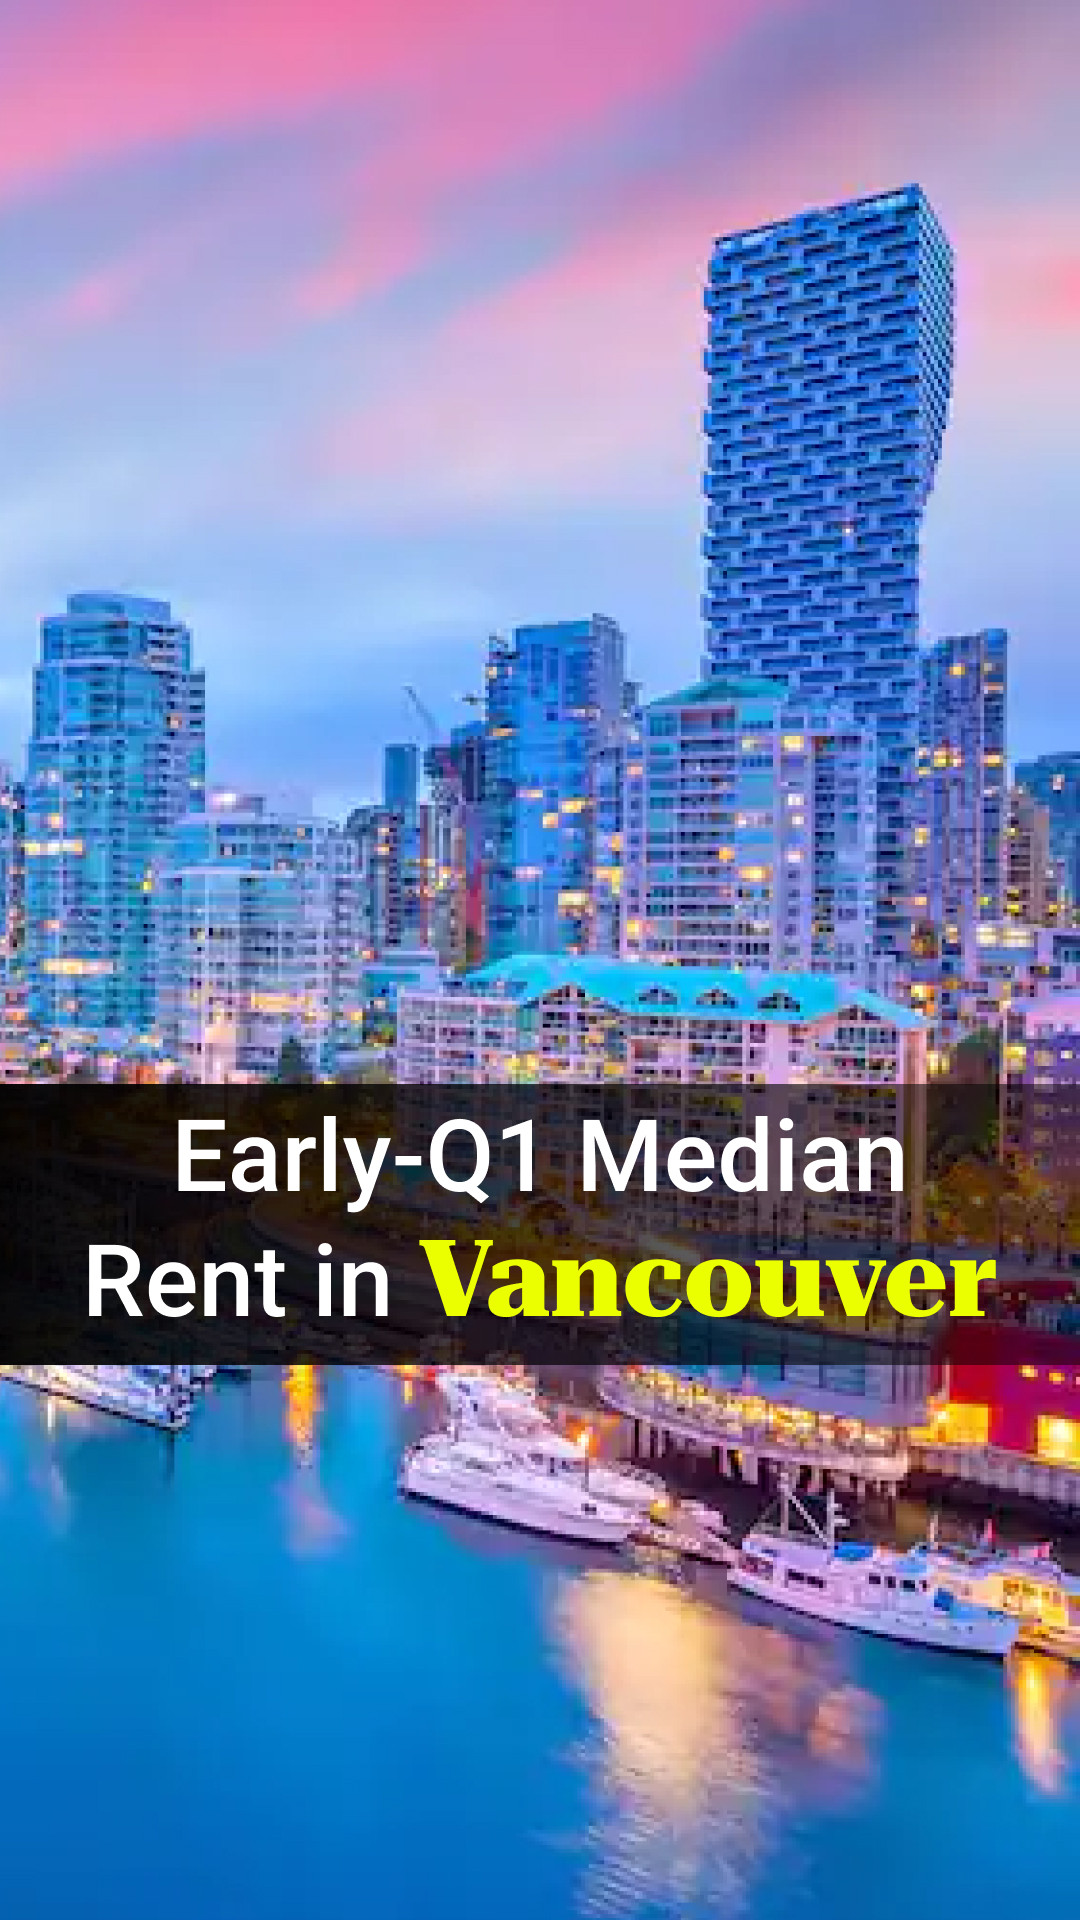 Early-Q1 Median Rent for Houses and Condos in Vancouver